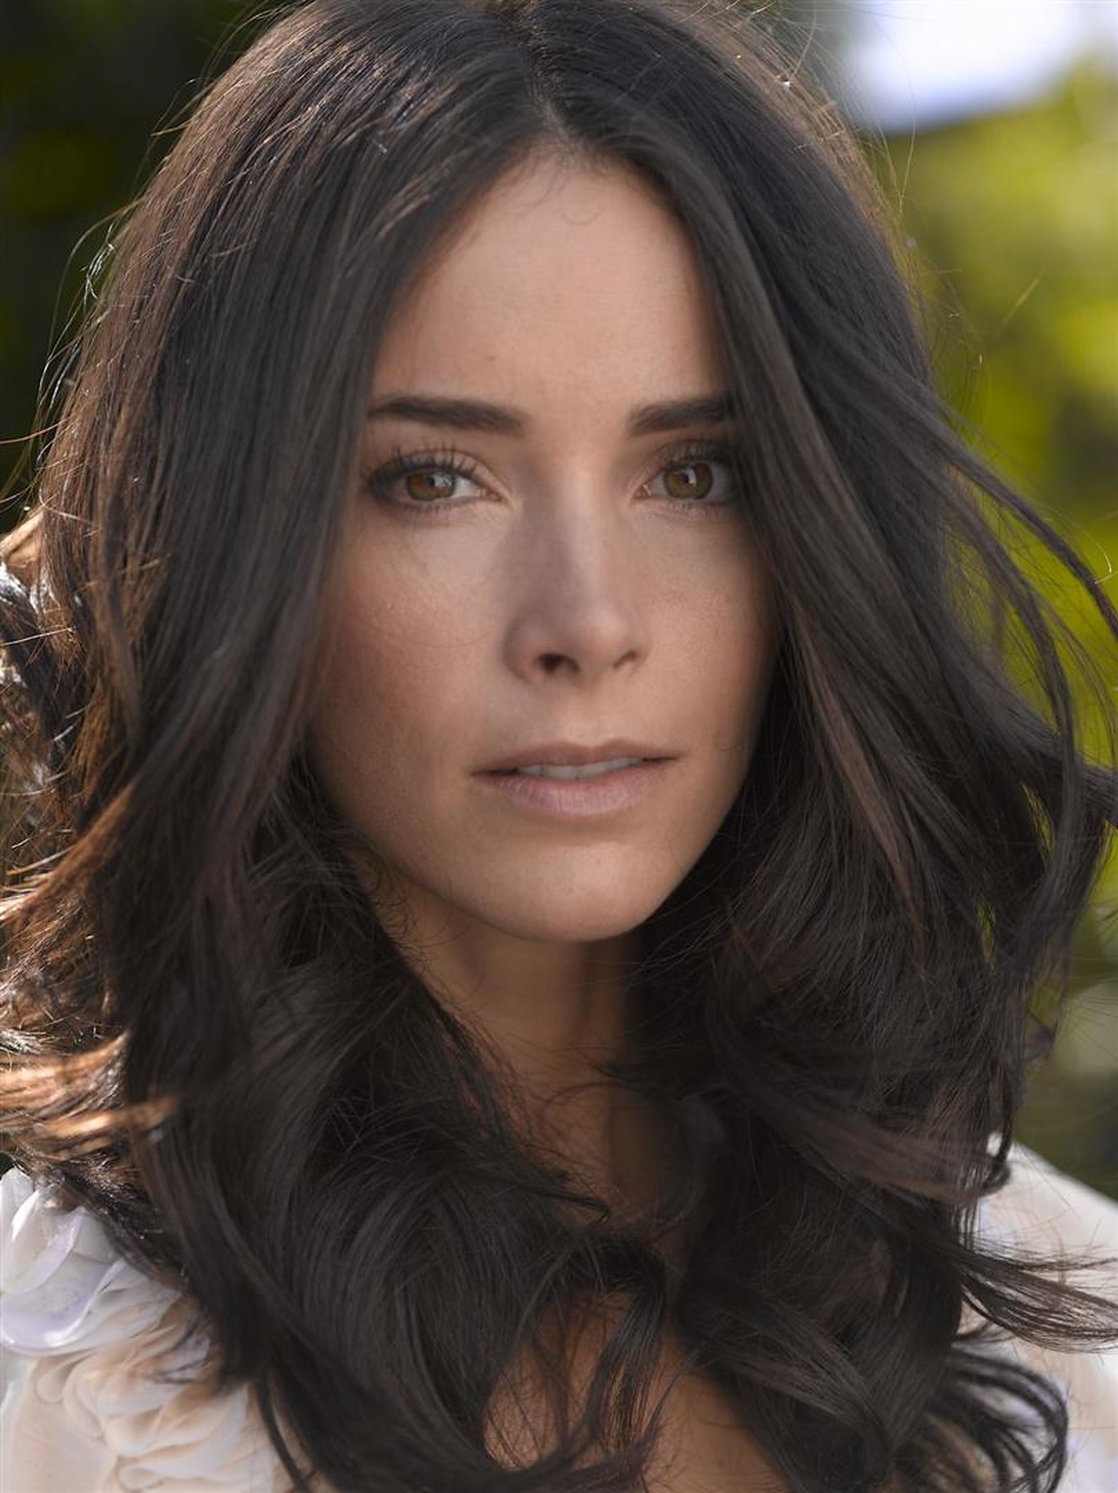 abigail spencer cowboys and aliens